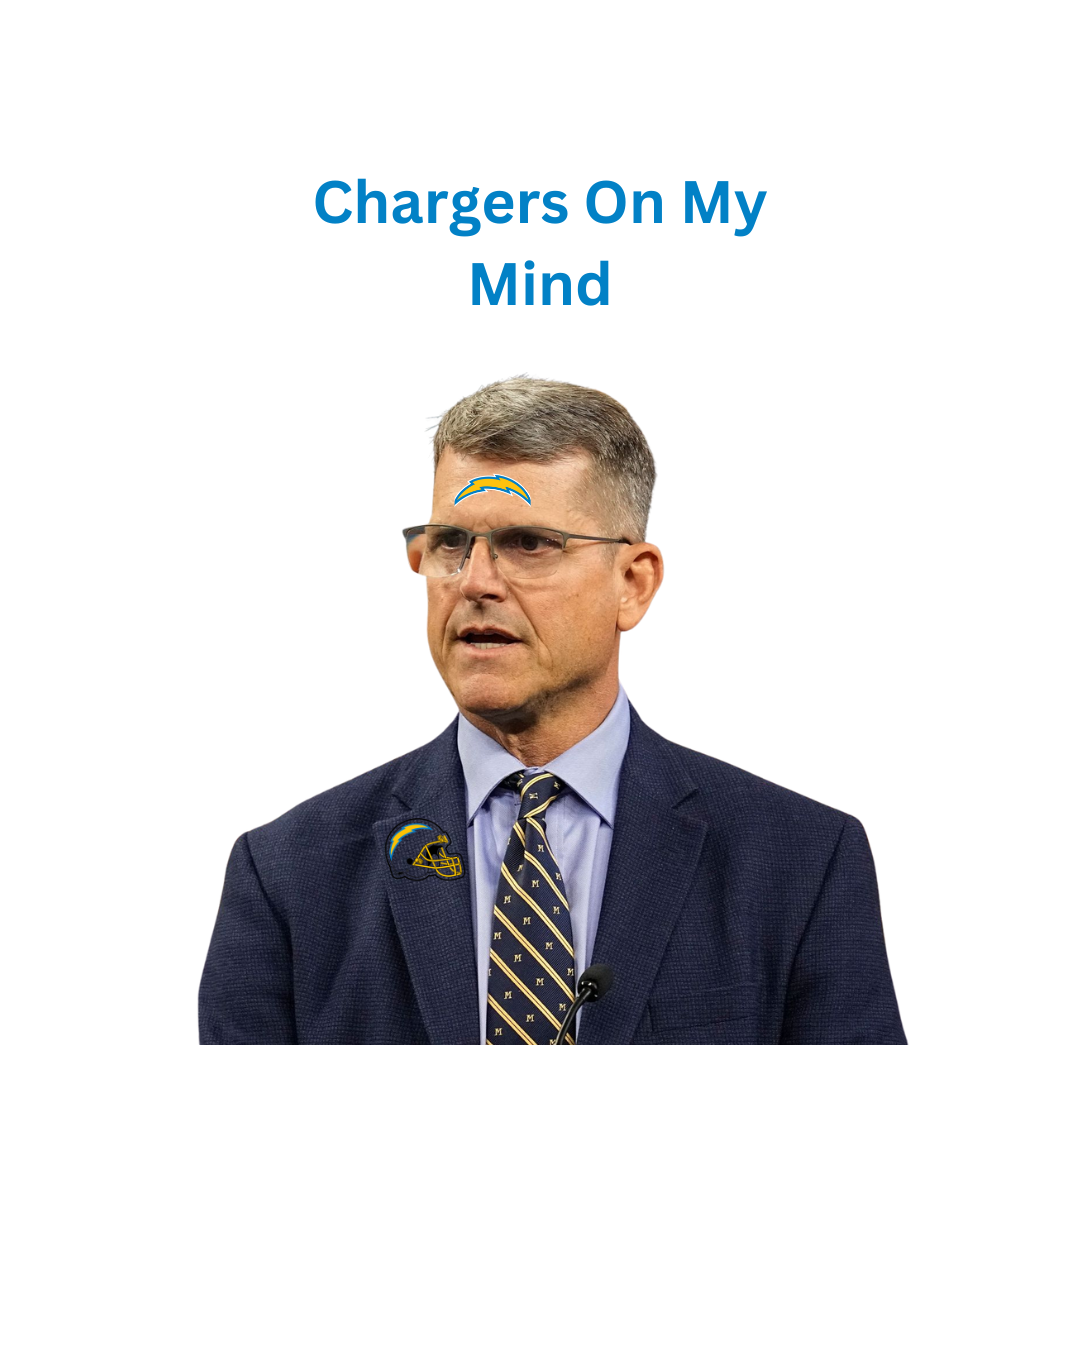 Jim Harbaugh Is A L.A. Chargers Head Coach - Its So San Diego